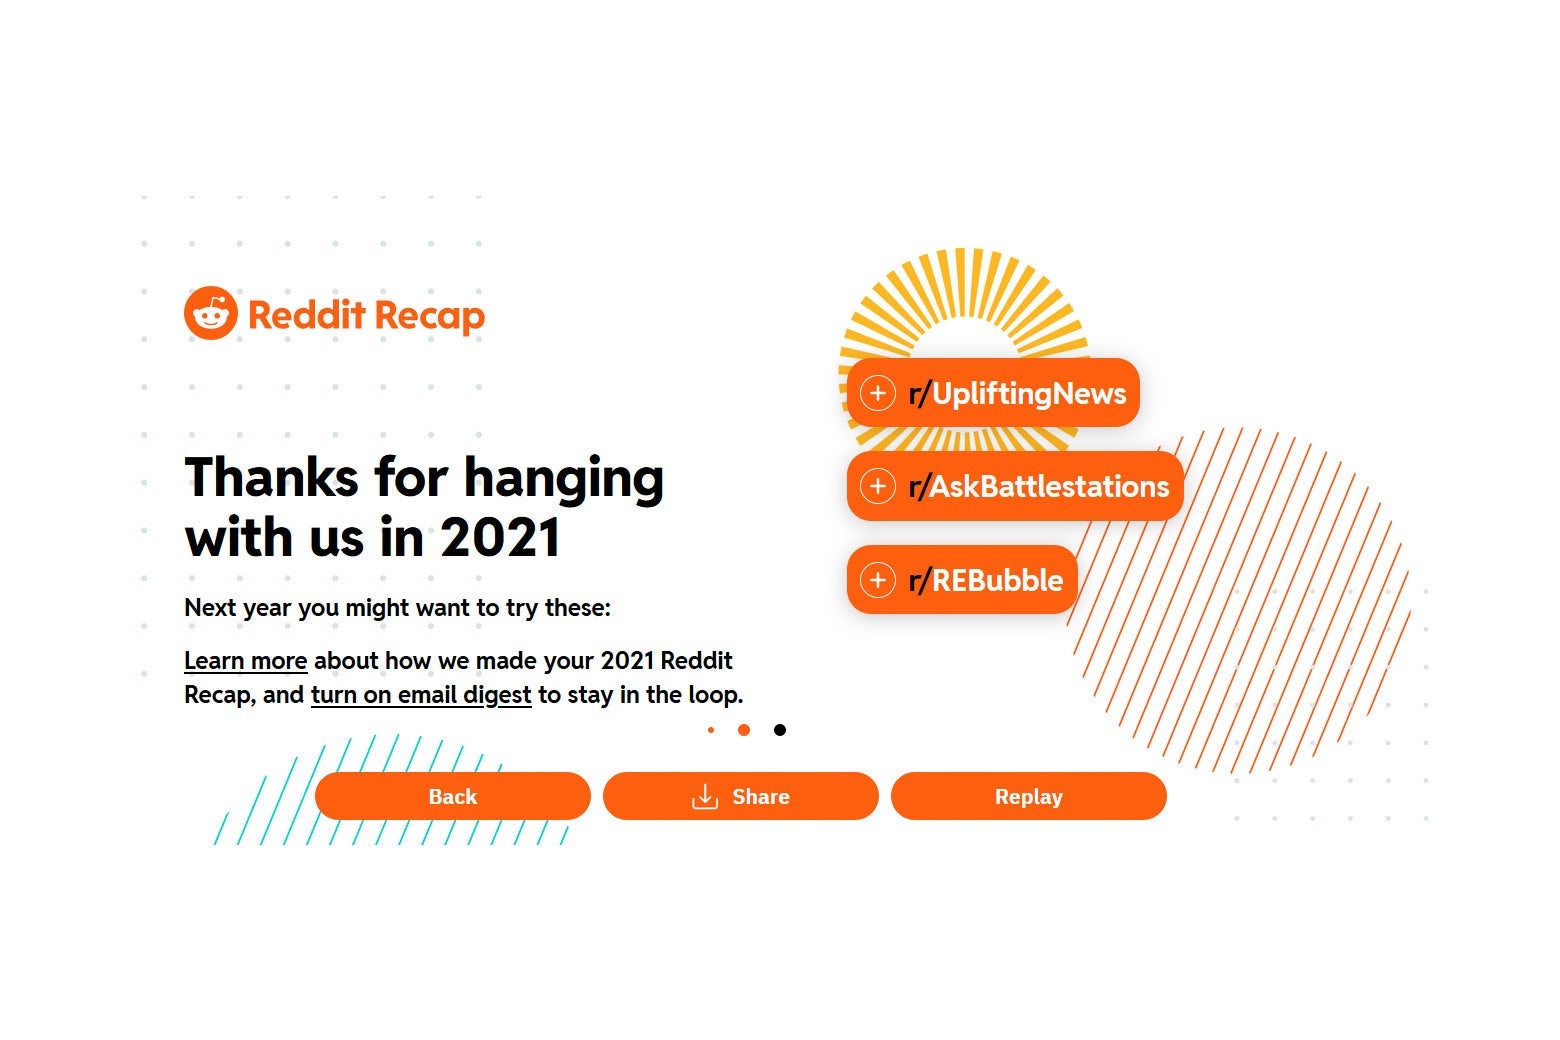 A screenshot says: "Thanks for hanging with us in 2021. Next year you might want to try these: r/UpliftingNews. r/AskBattlestations. r/REBubble."